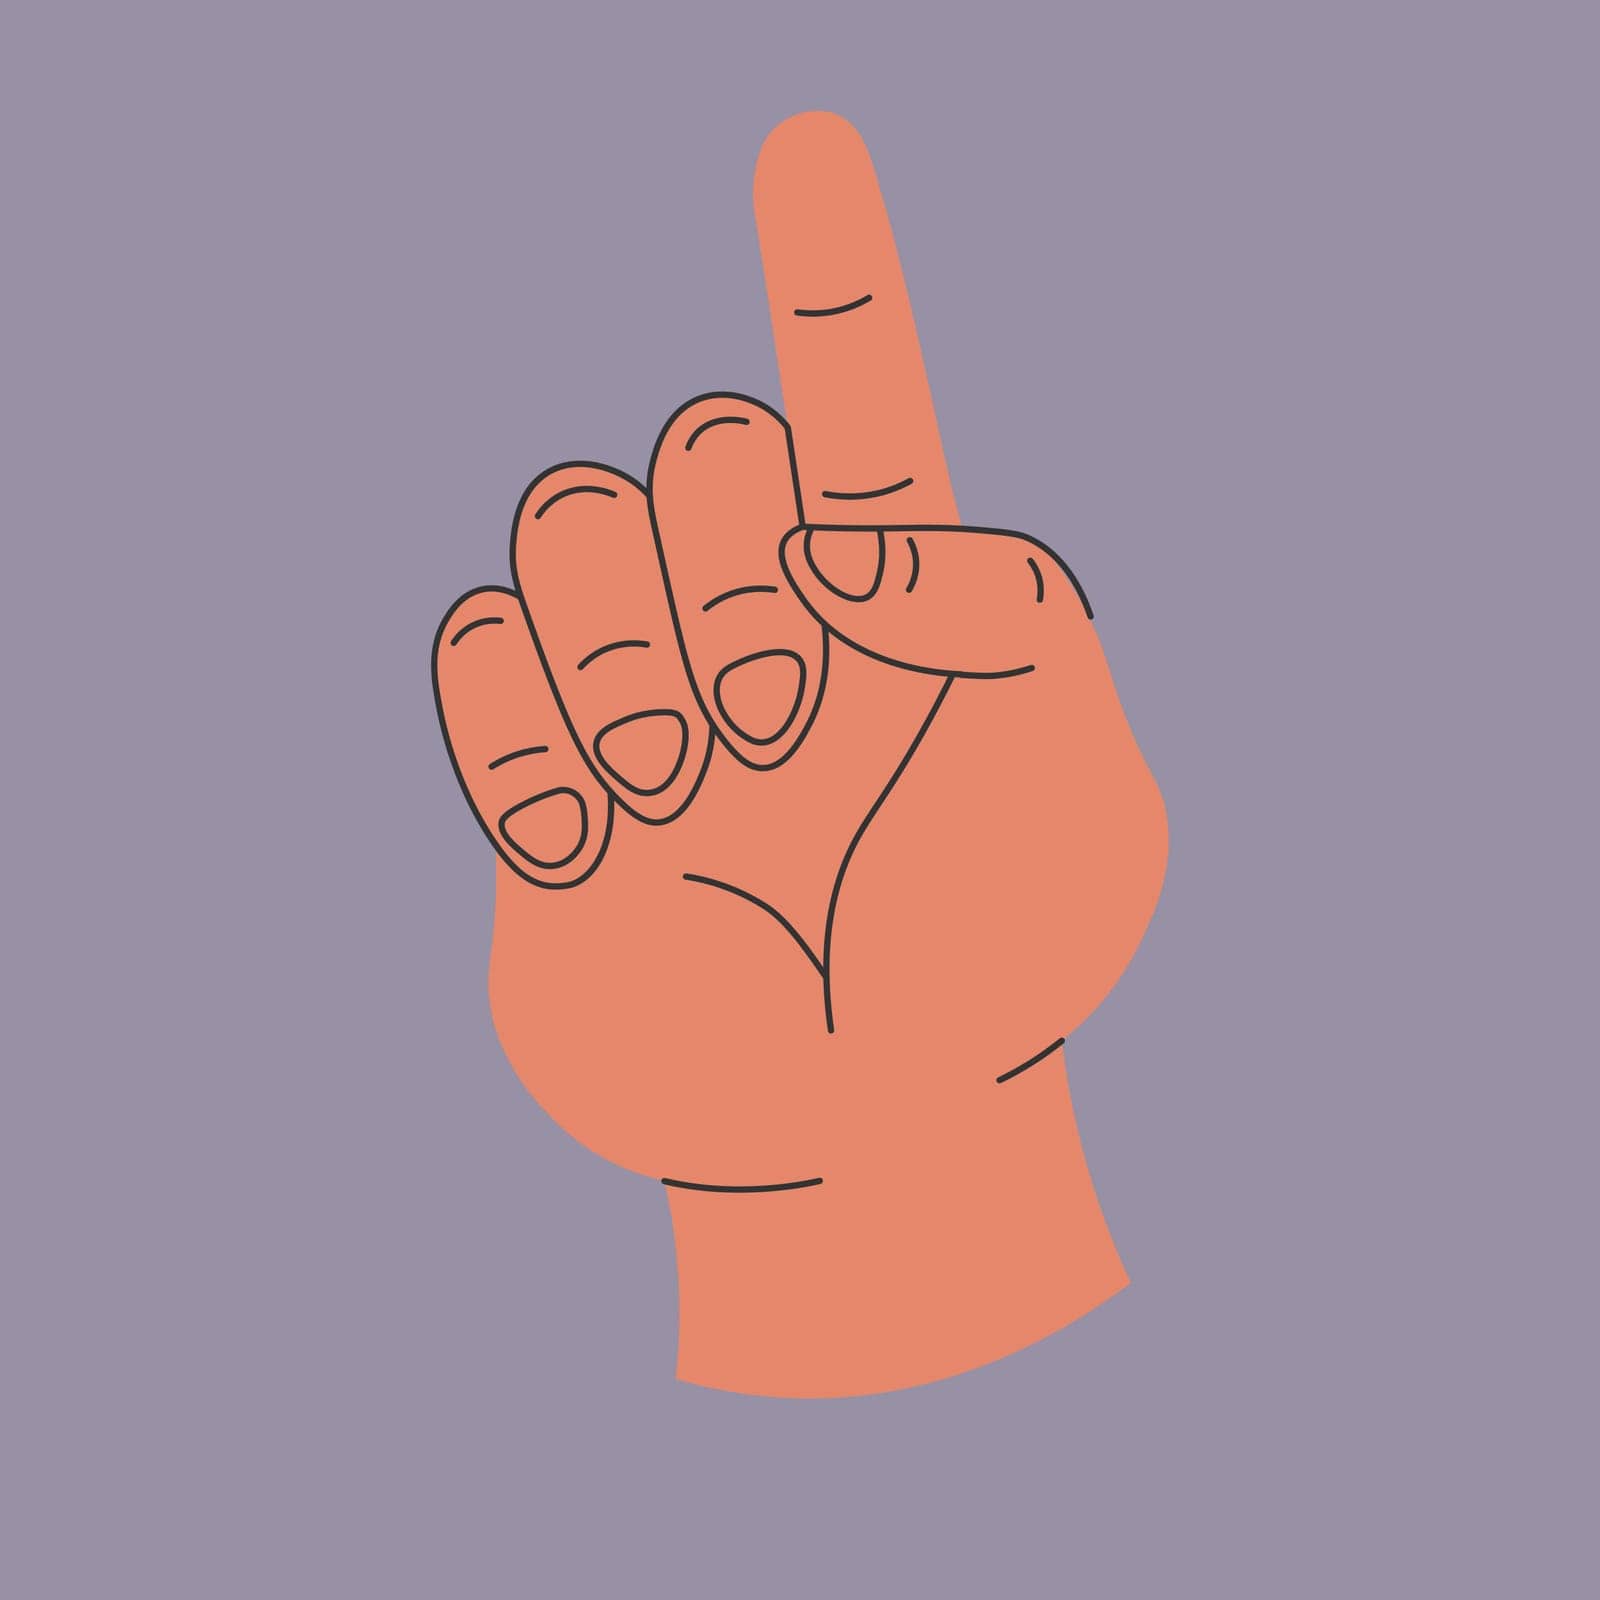 Pointing up an index finger, isolated hand of man or woman. Palm with lines, arm with fingers and fingernails. Gesturing and non verbal communication means. Vector in flat style illustration